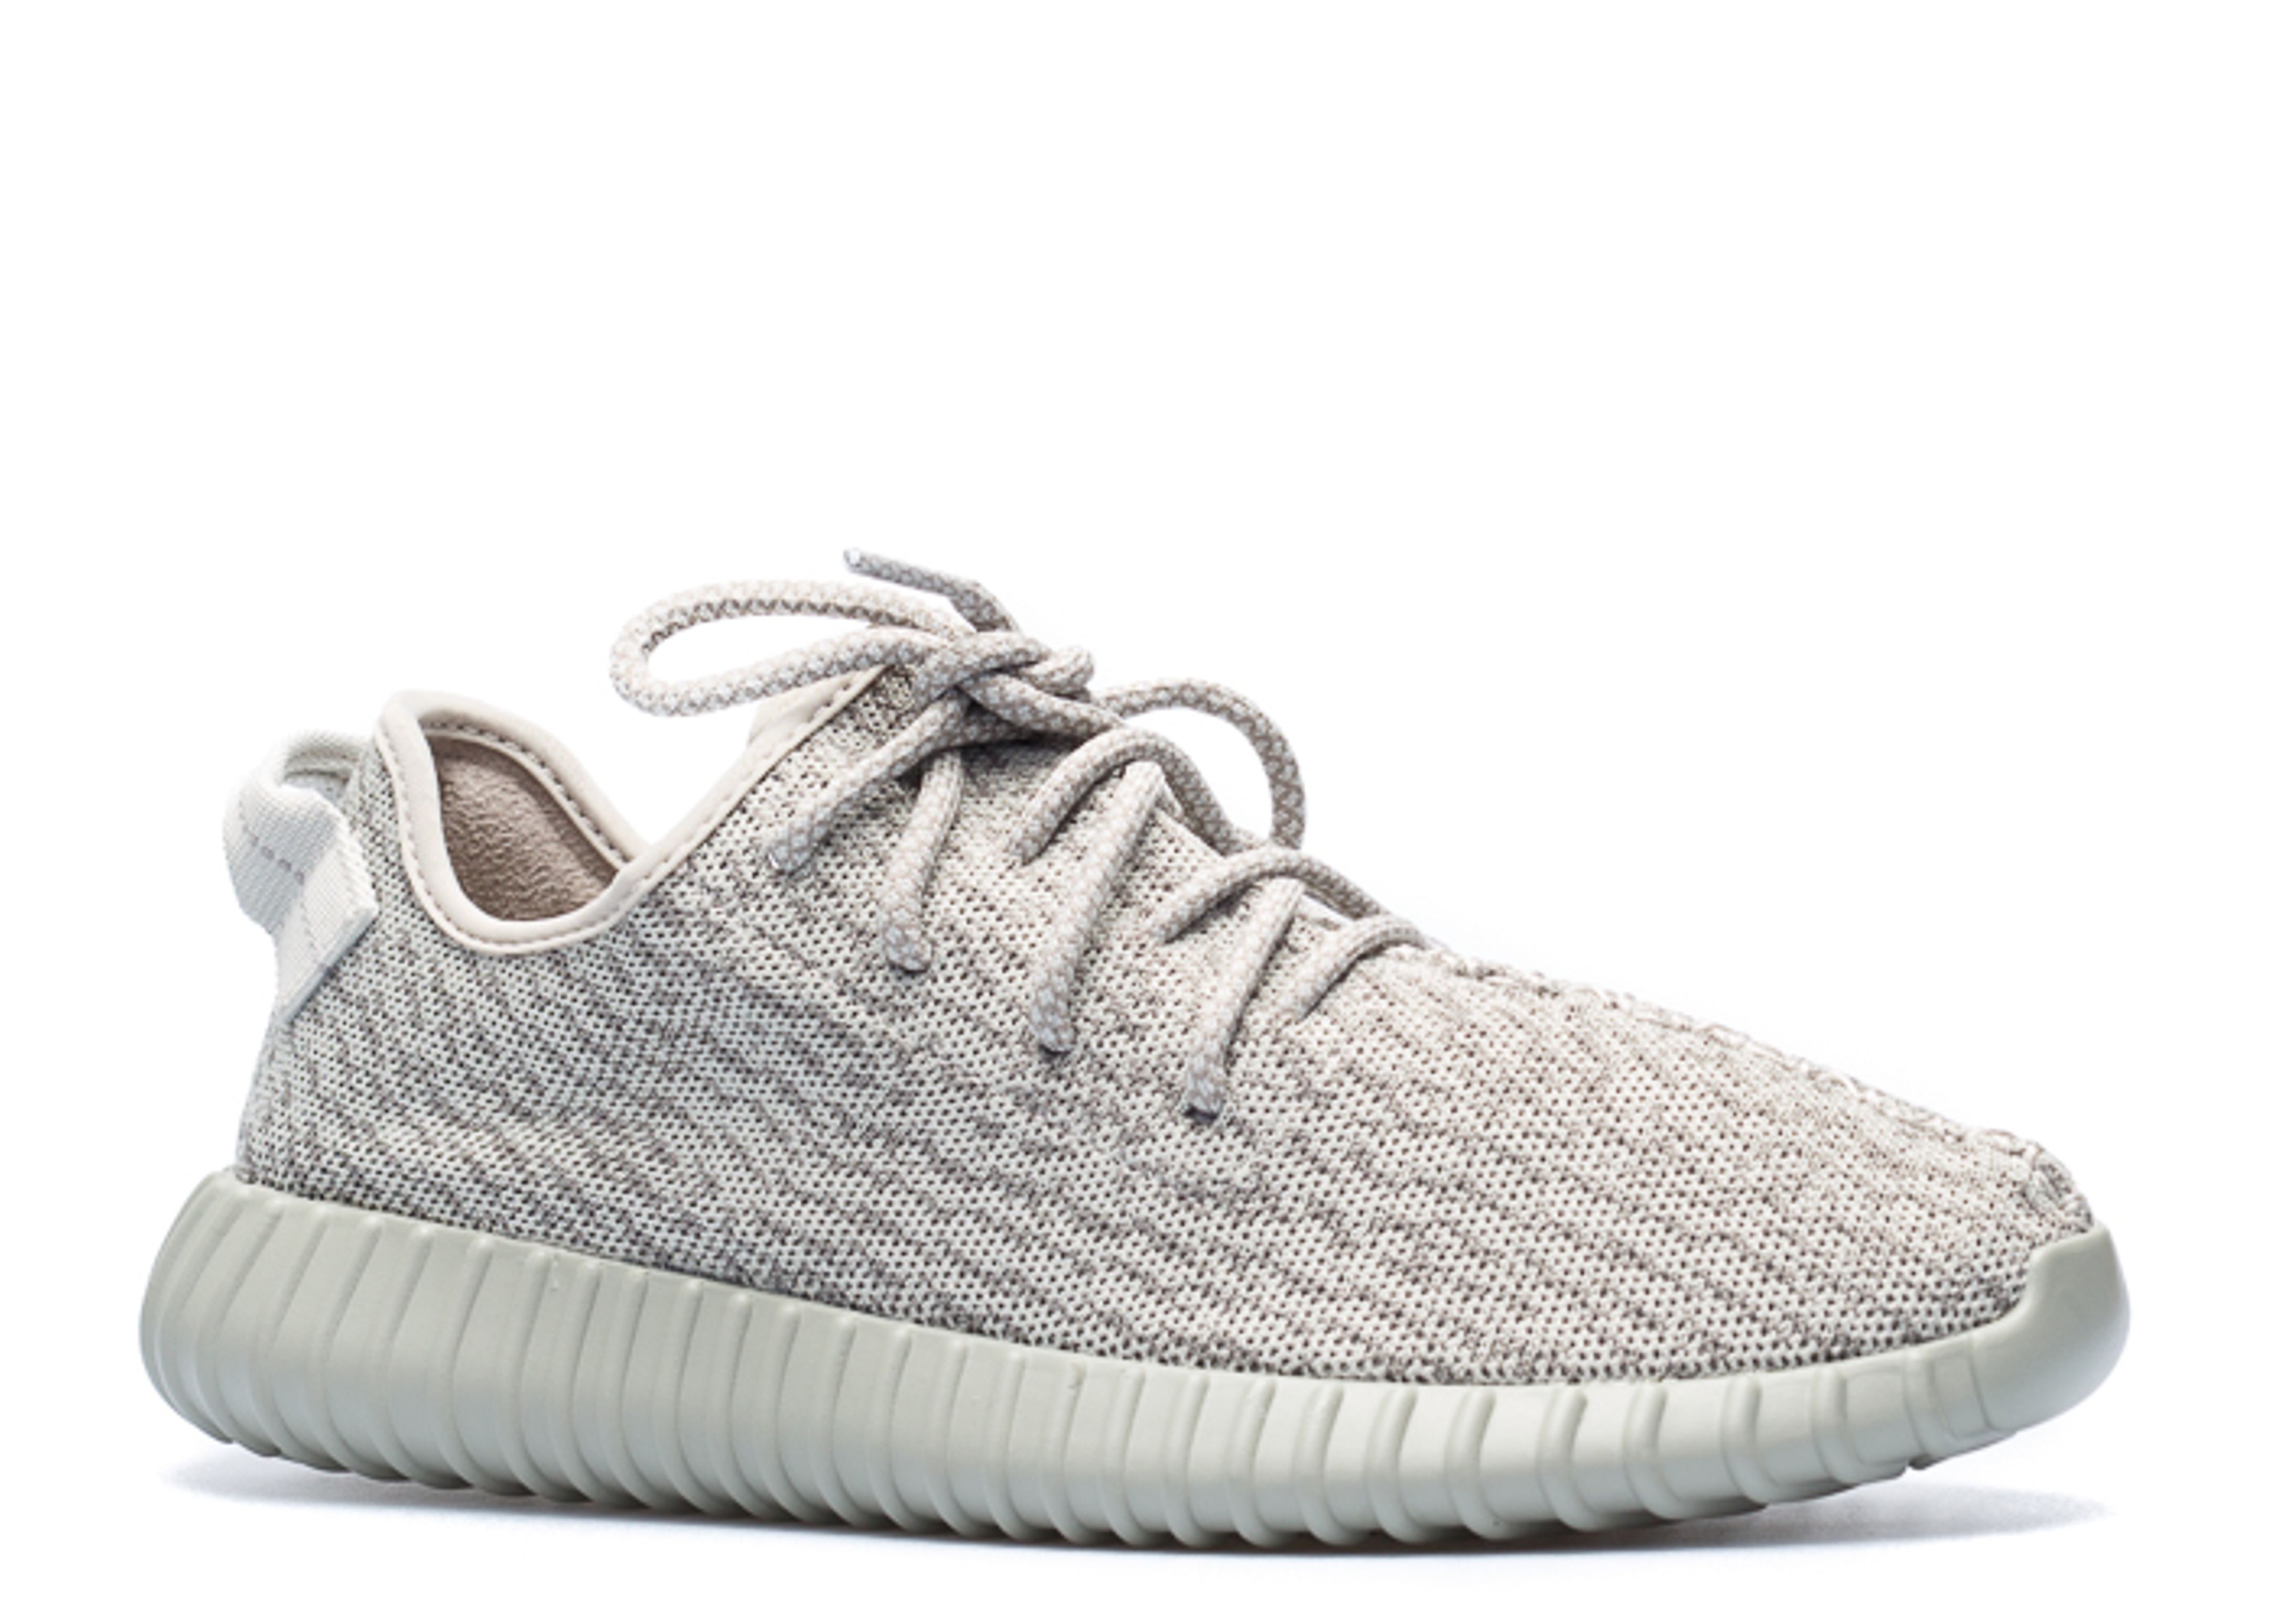 Adidas Yeezy Boost 350 MOONROCK Unboxing Review 